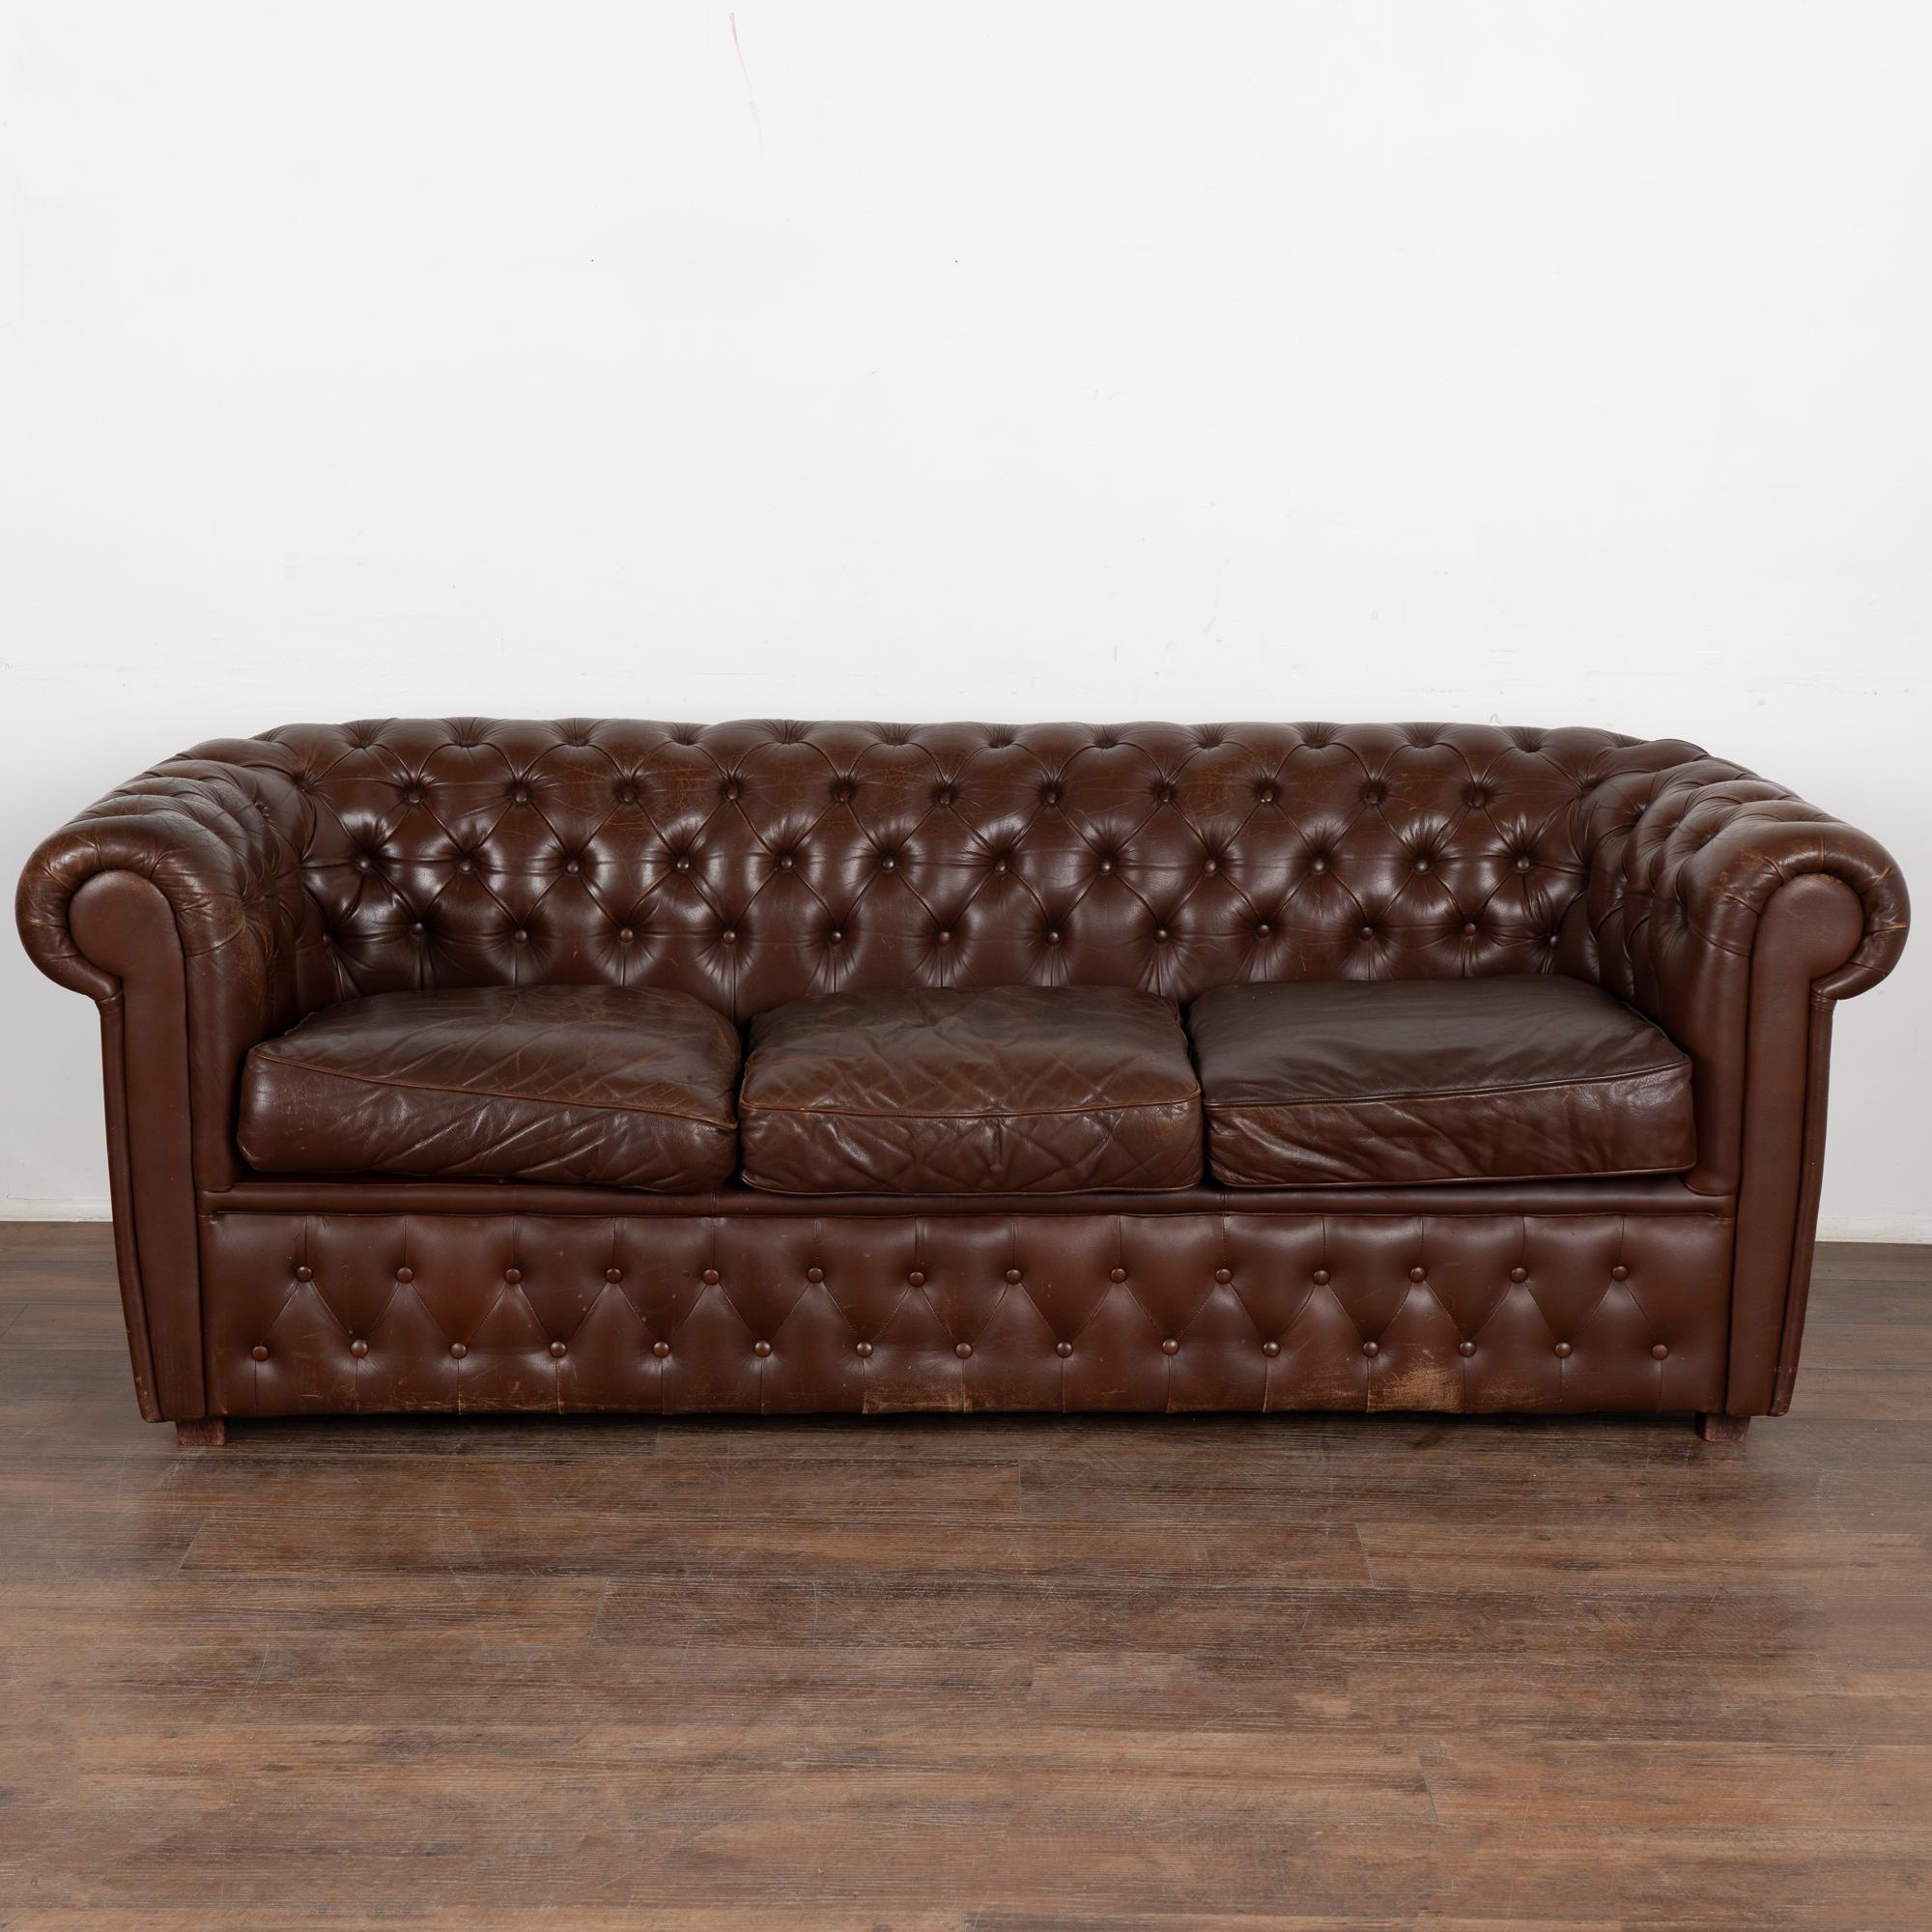 20th Century Chesterfield Style Brown Leather 3 Seat Sofa & 2 Club Chairs, circa 1920-40 For Sale